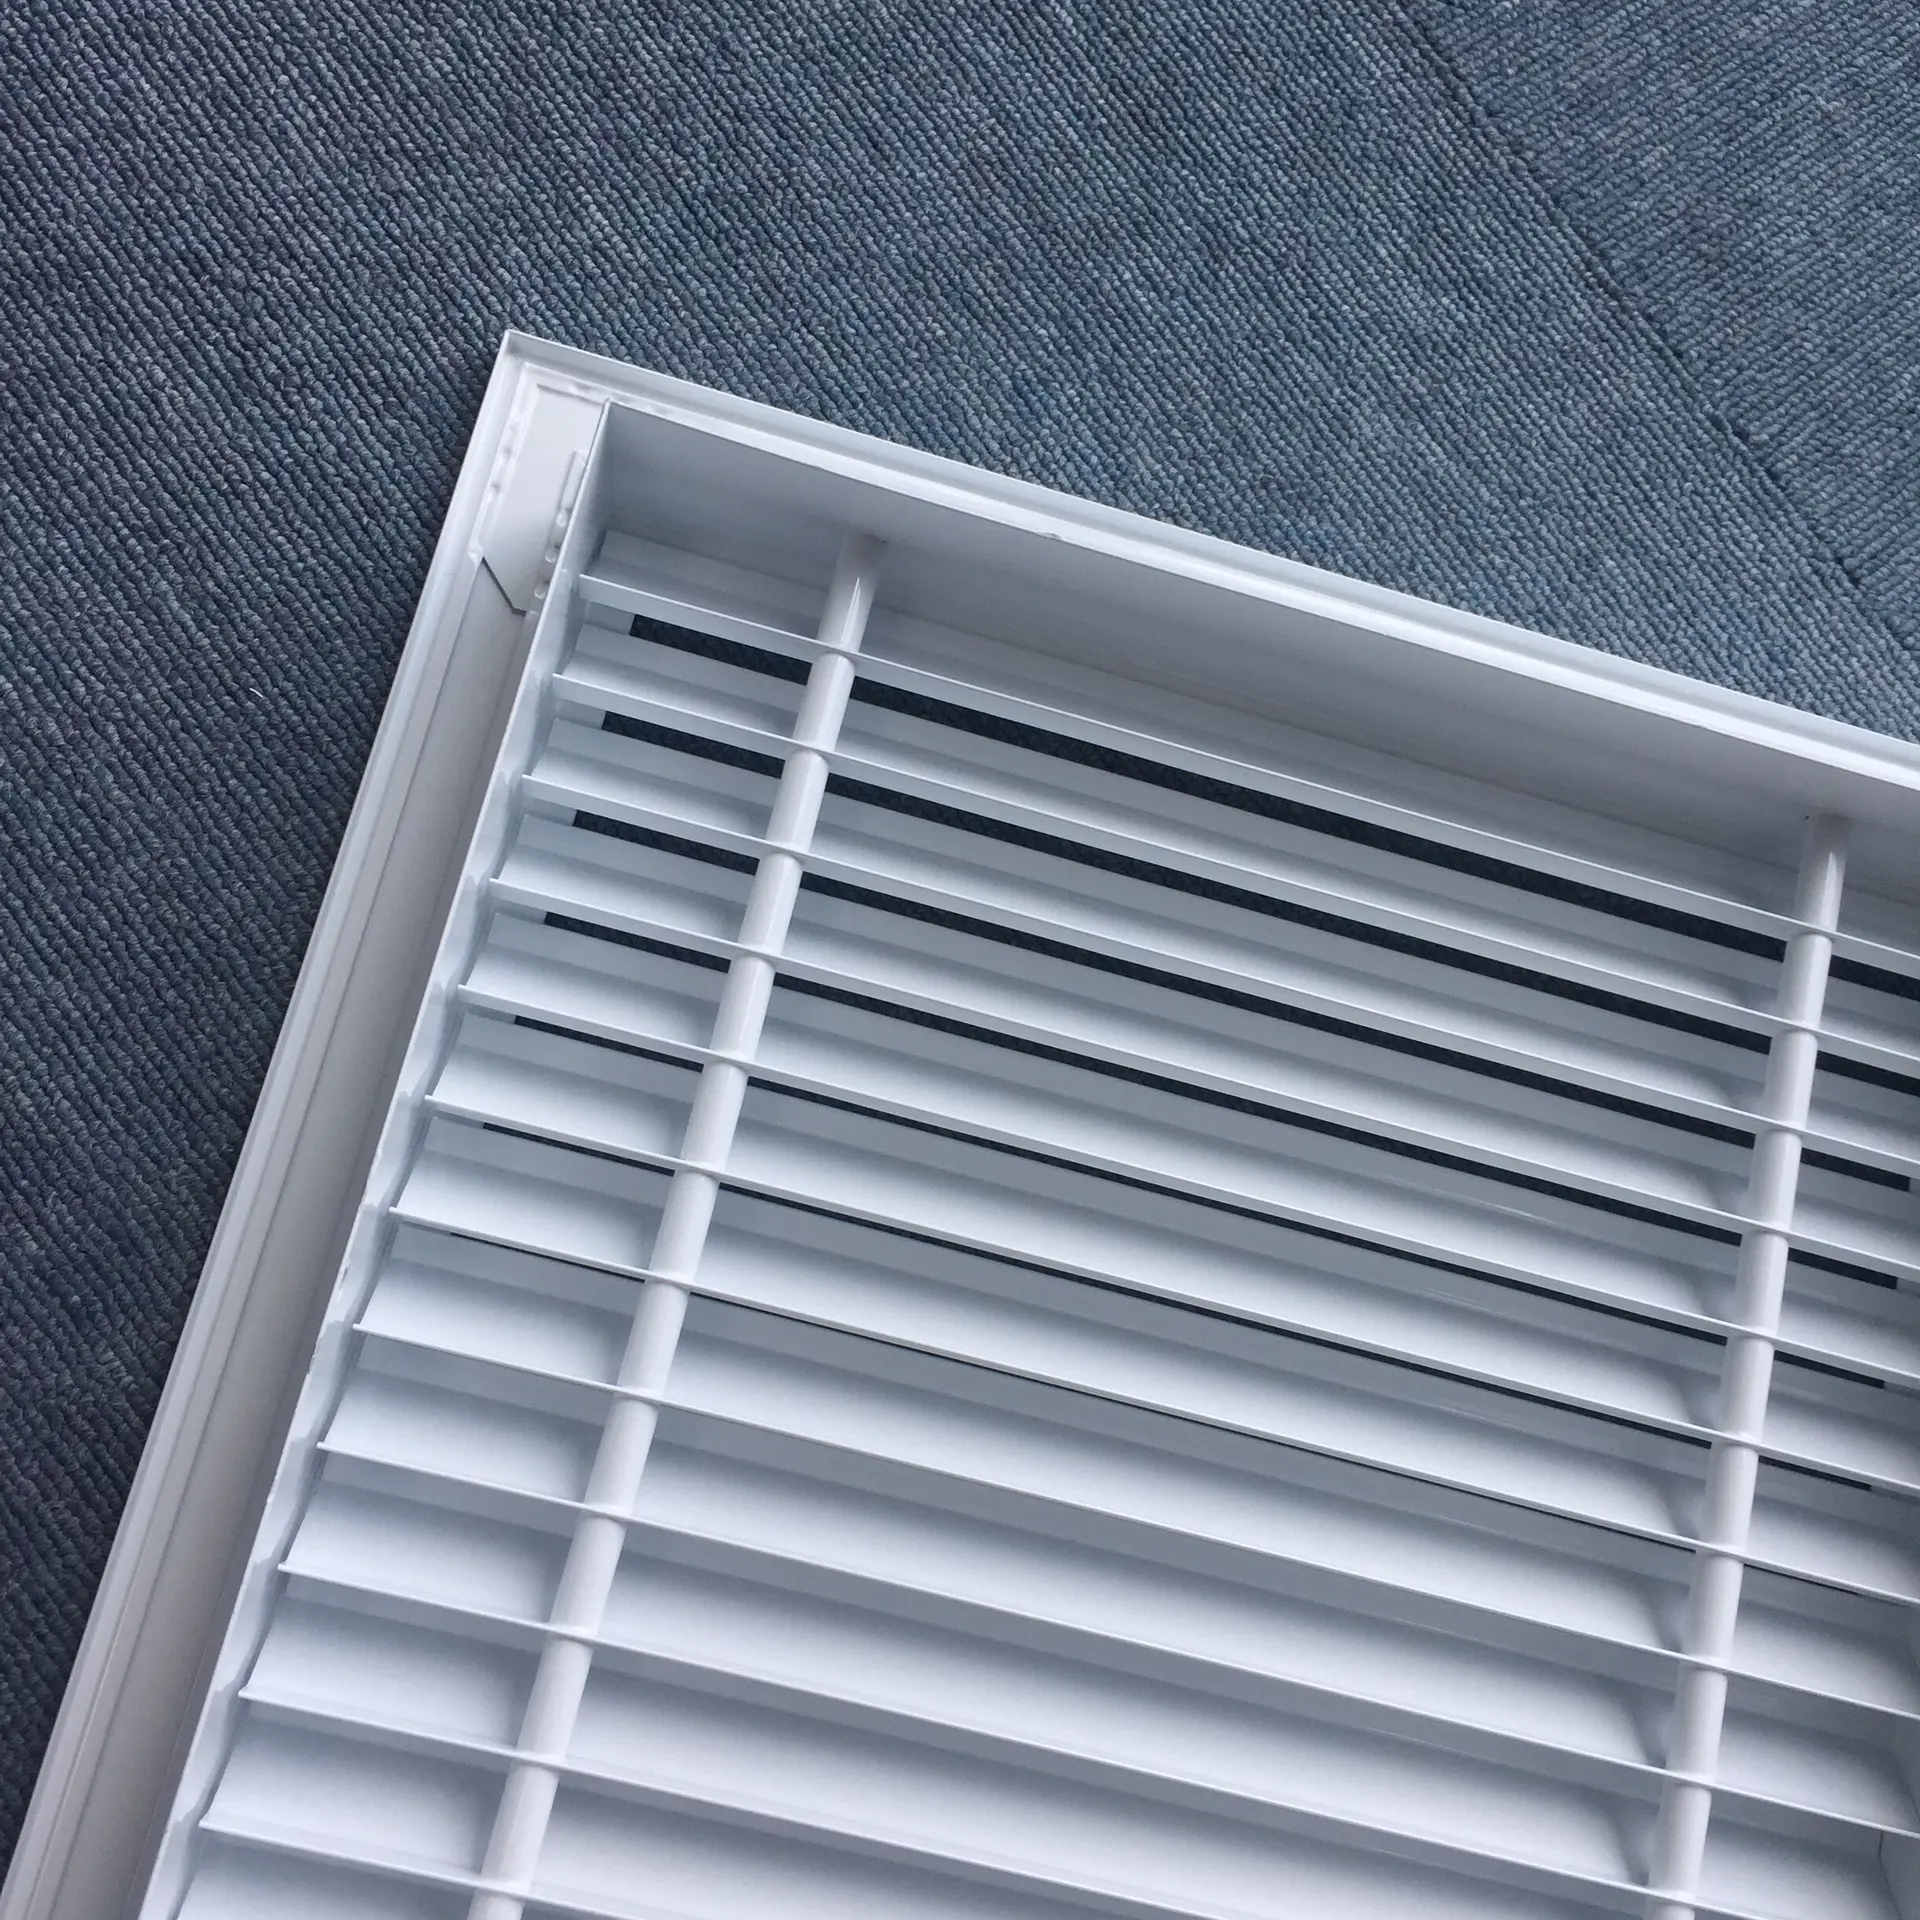 HVAC System Commercial Building Return Air Ventilation Wall Mounted Grilles